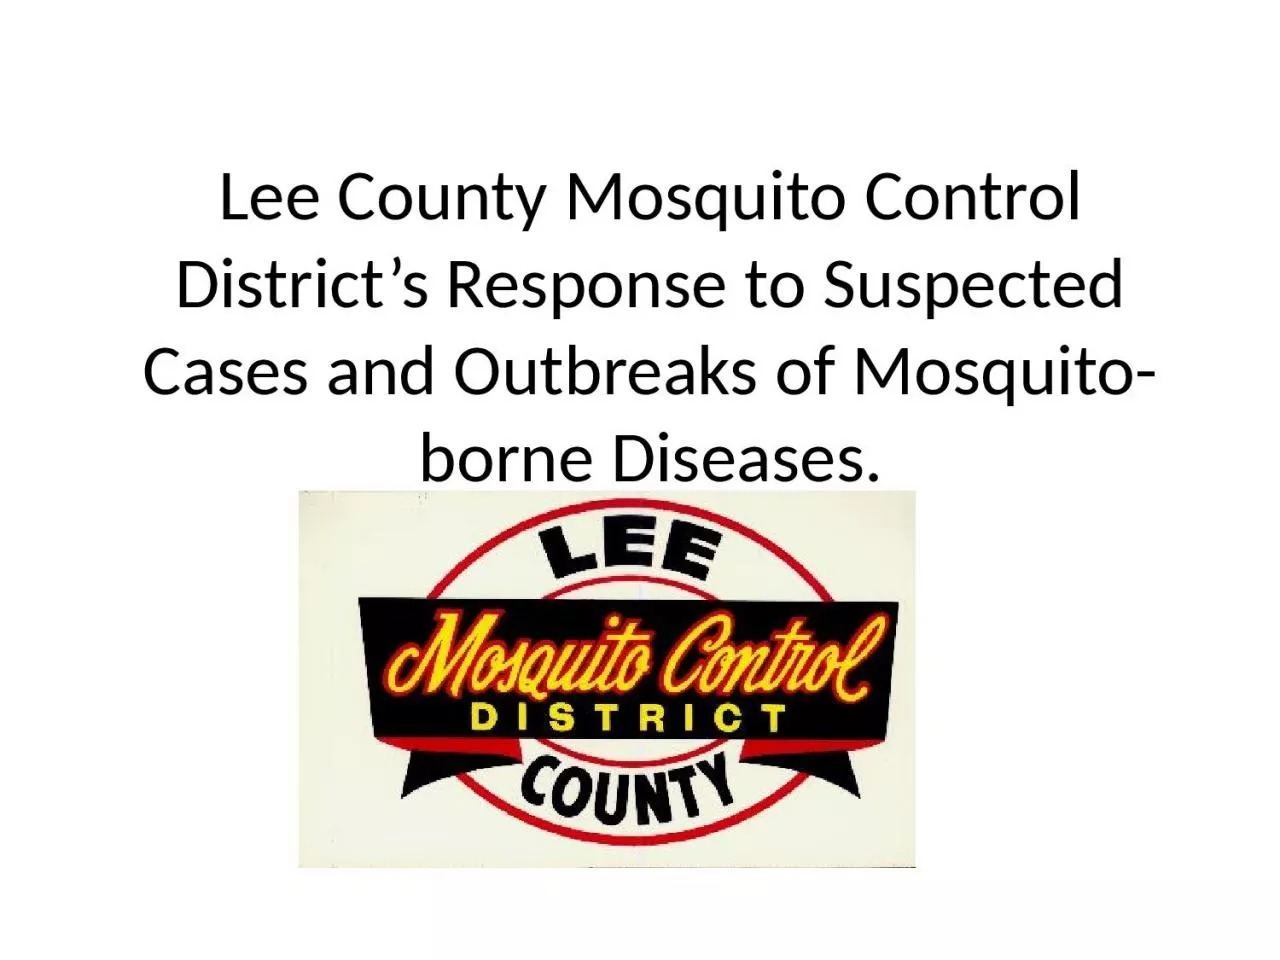 Lee County Mosquito Control District’s Response to Suspected Cases and Outbreaks of